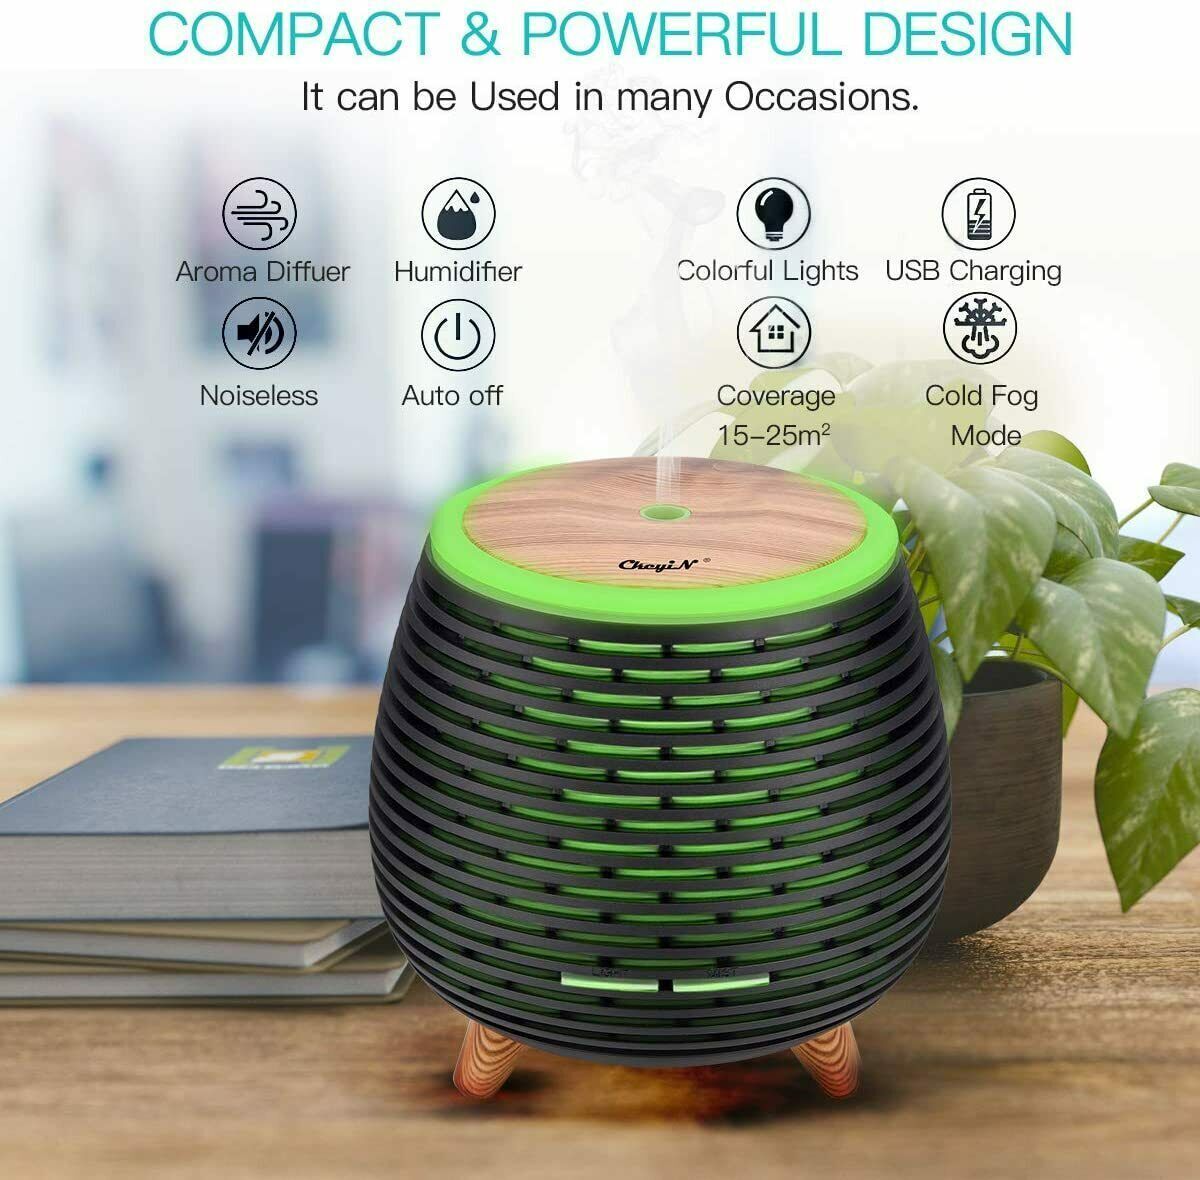 Mini Oil Diffuser SpyCam with versatile functionality including humidification, colorful lights, Full HD recording, quiet operation, and WiFi connectivity, suitable for various settings.